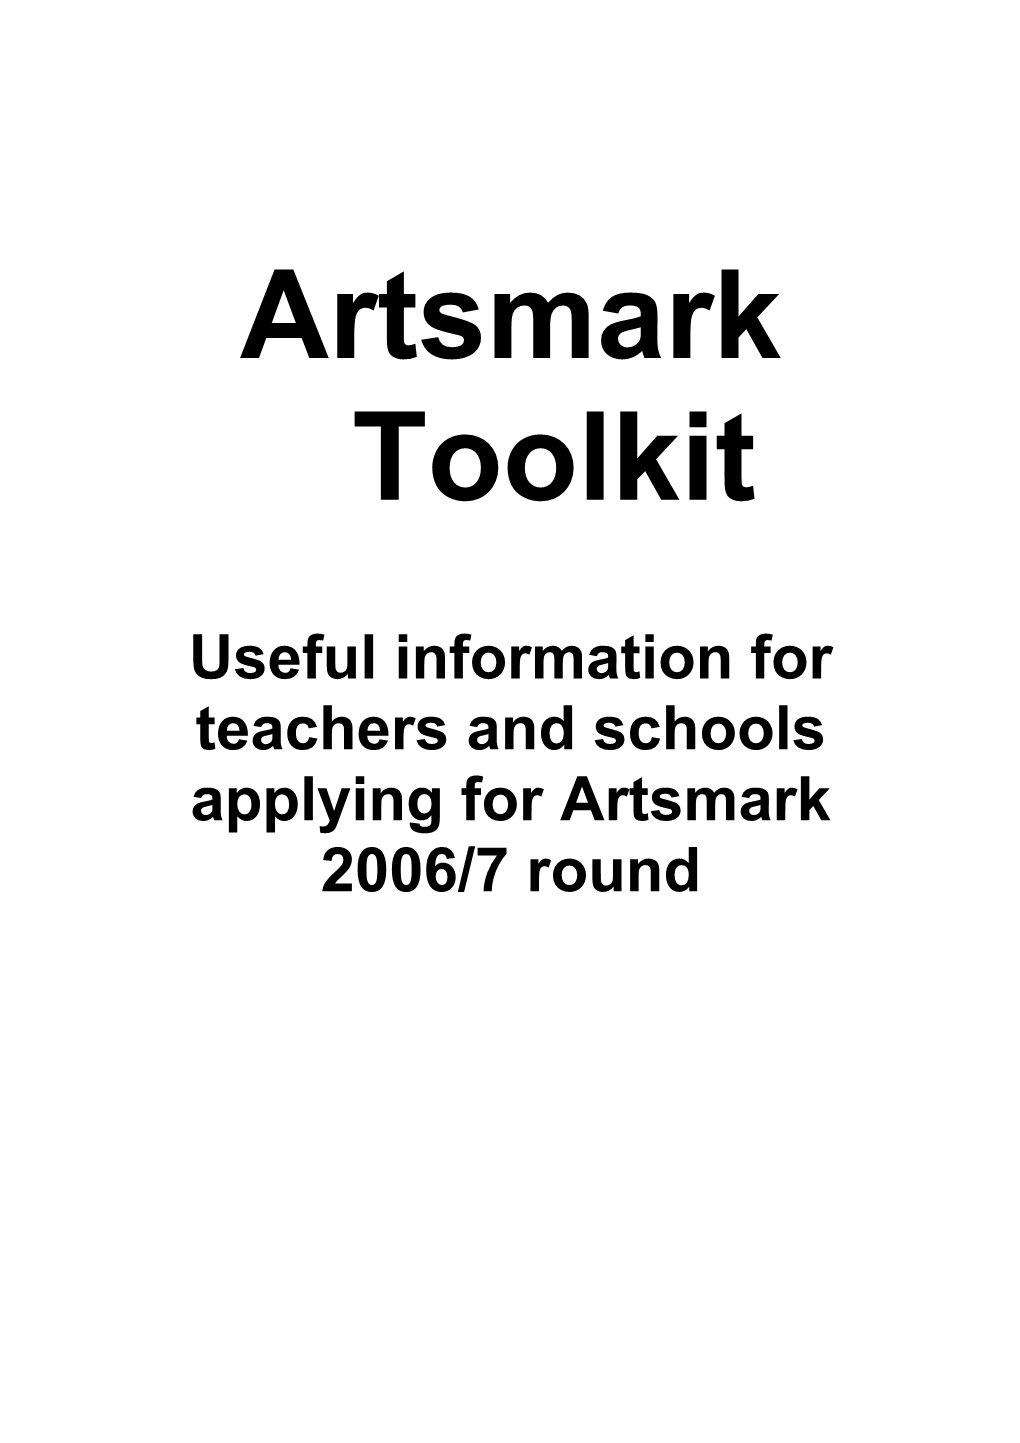 Useful Information for Teachers and Schools Applying for Artsmark 2006/7 Round